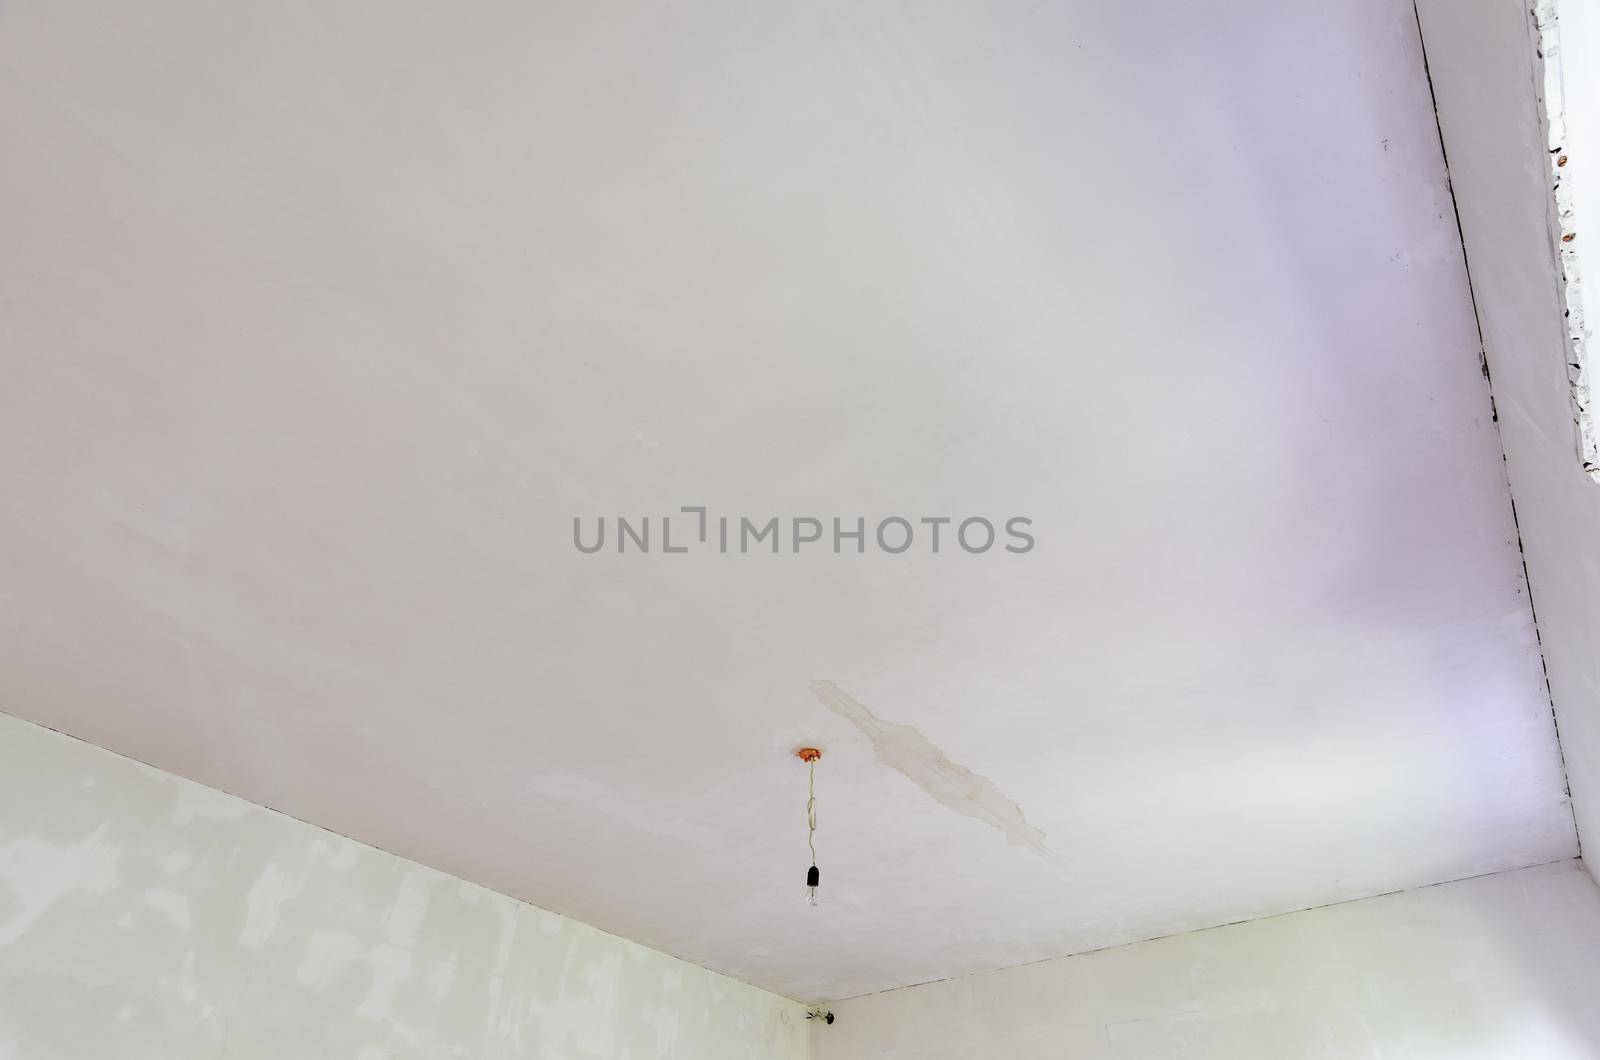 Plastered ceiling in the room, stains from flooding from above are visible on the ceiling a